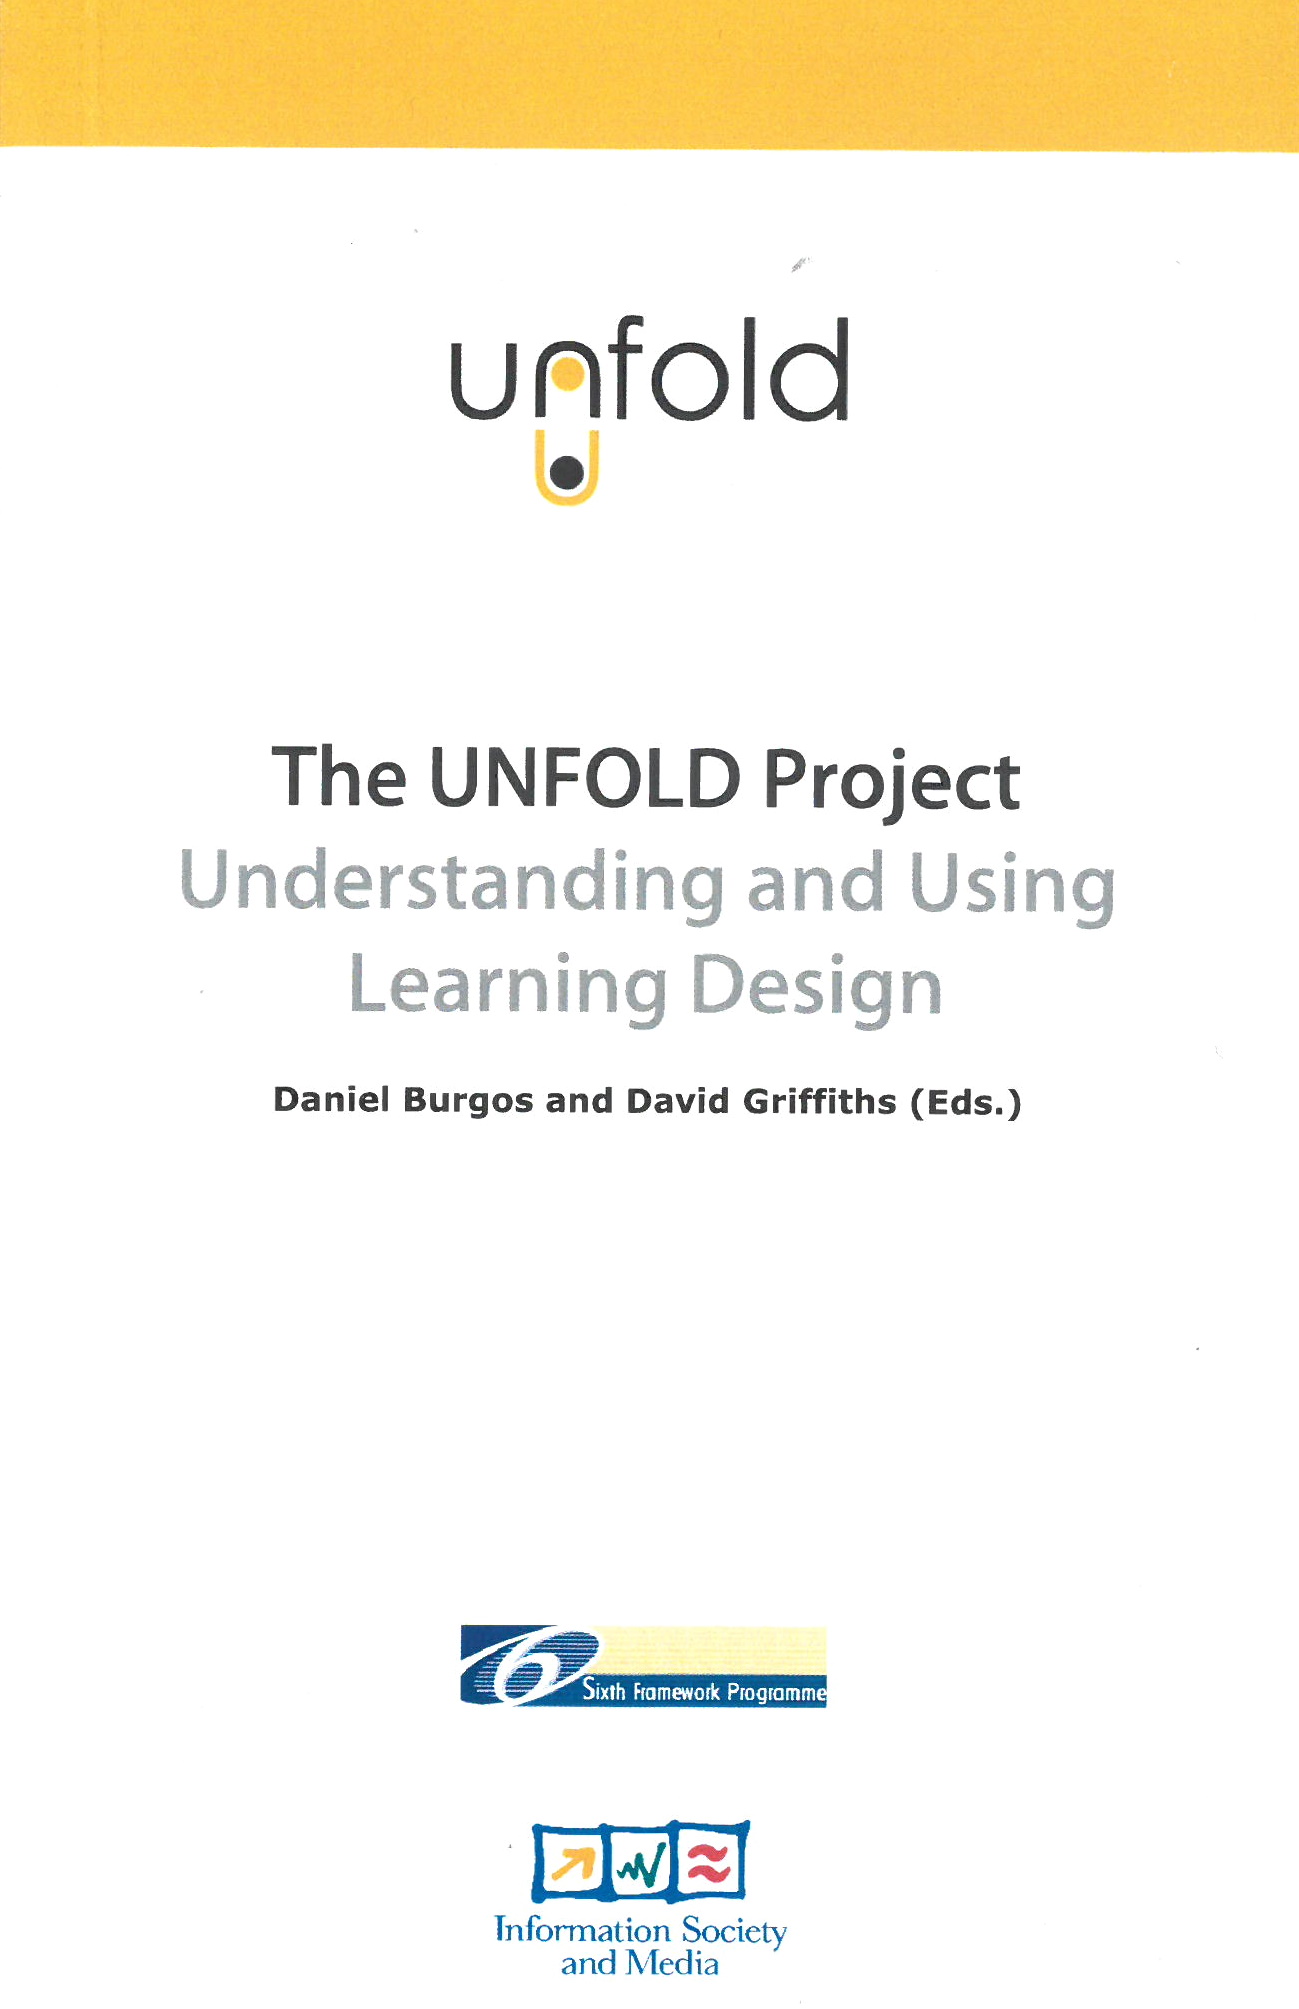 Capa de Unfold project: Understanding and Using Learning Design